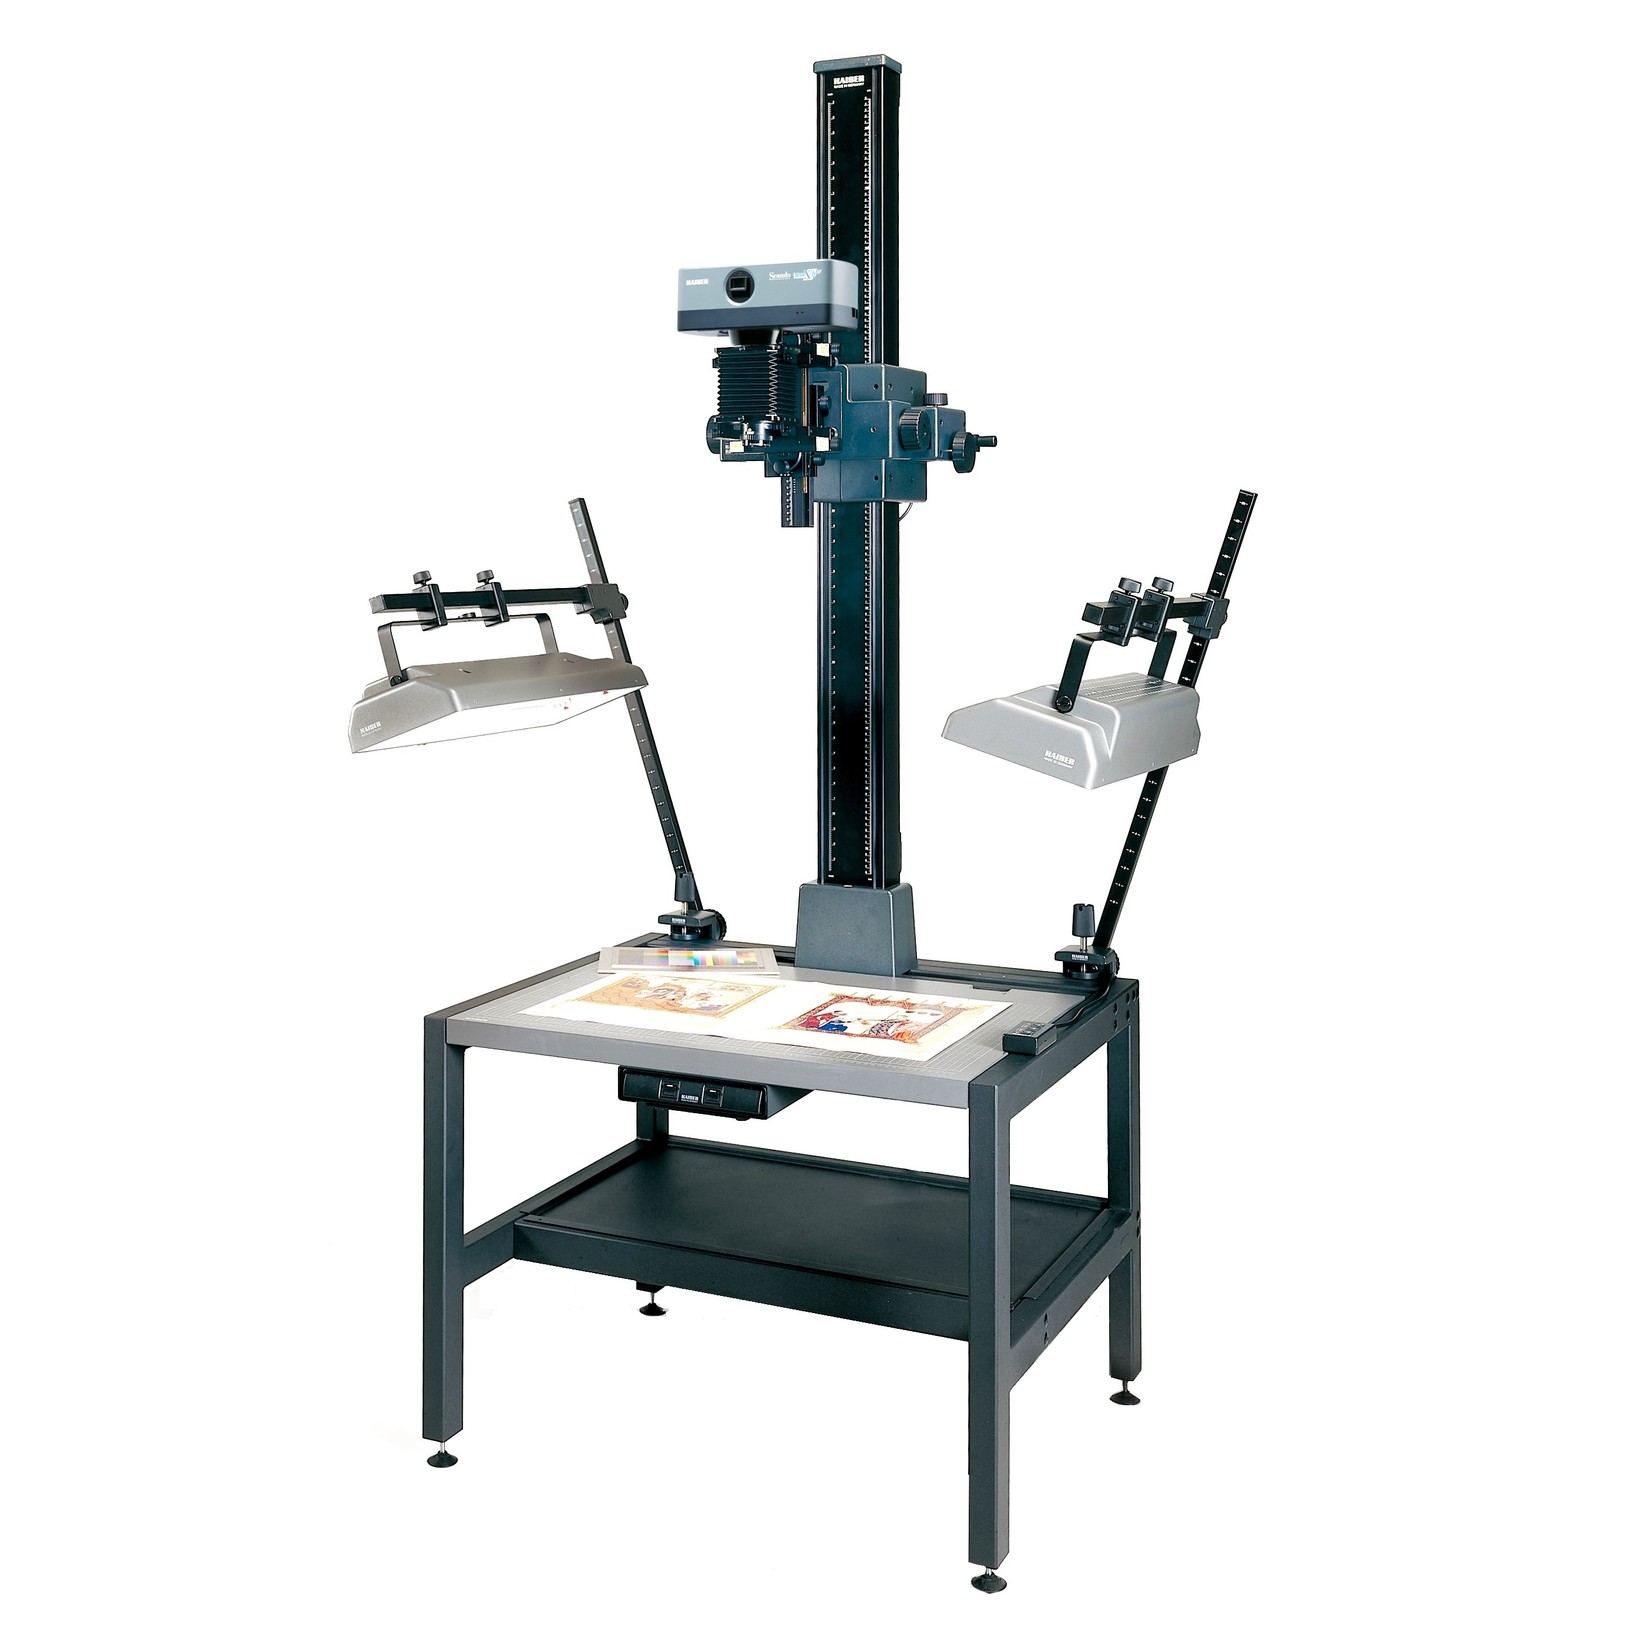 Repro stand as complete system with motorized Z-axis and table construction